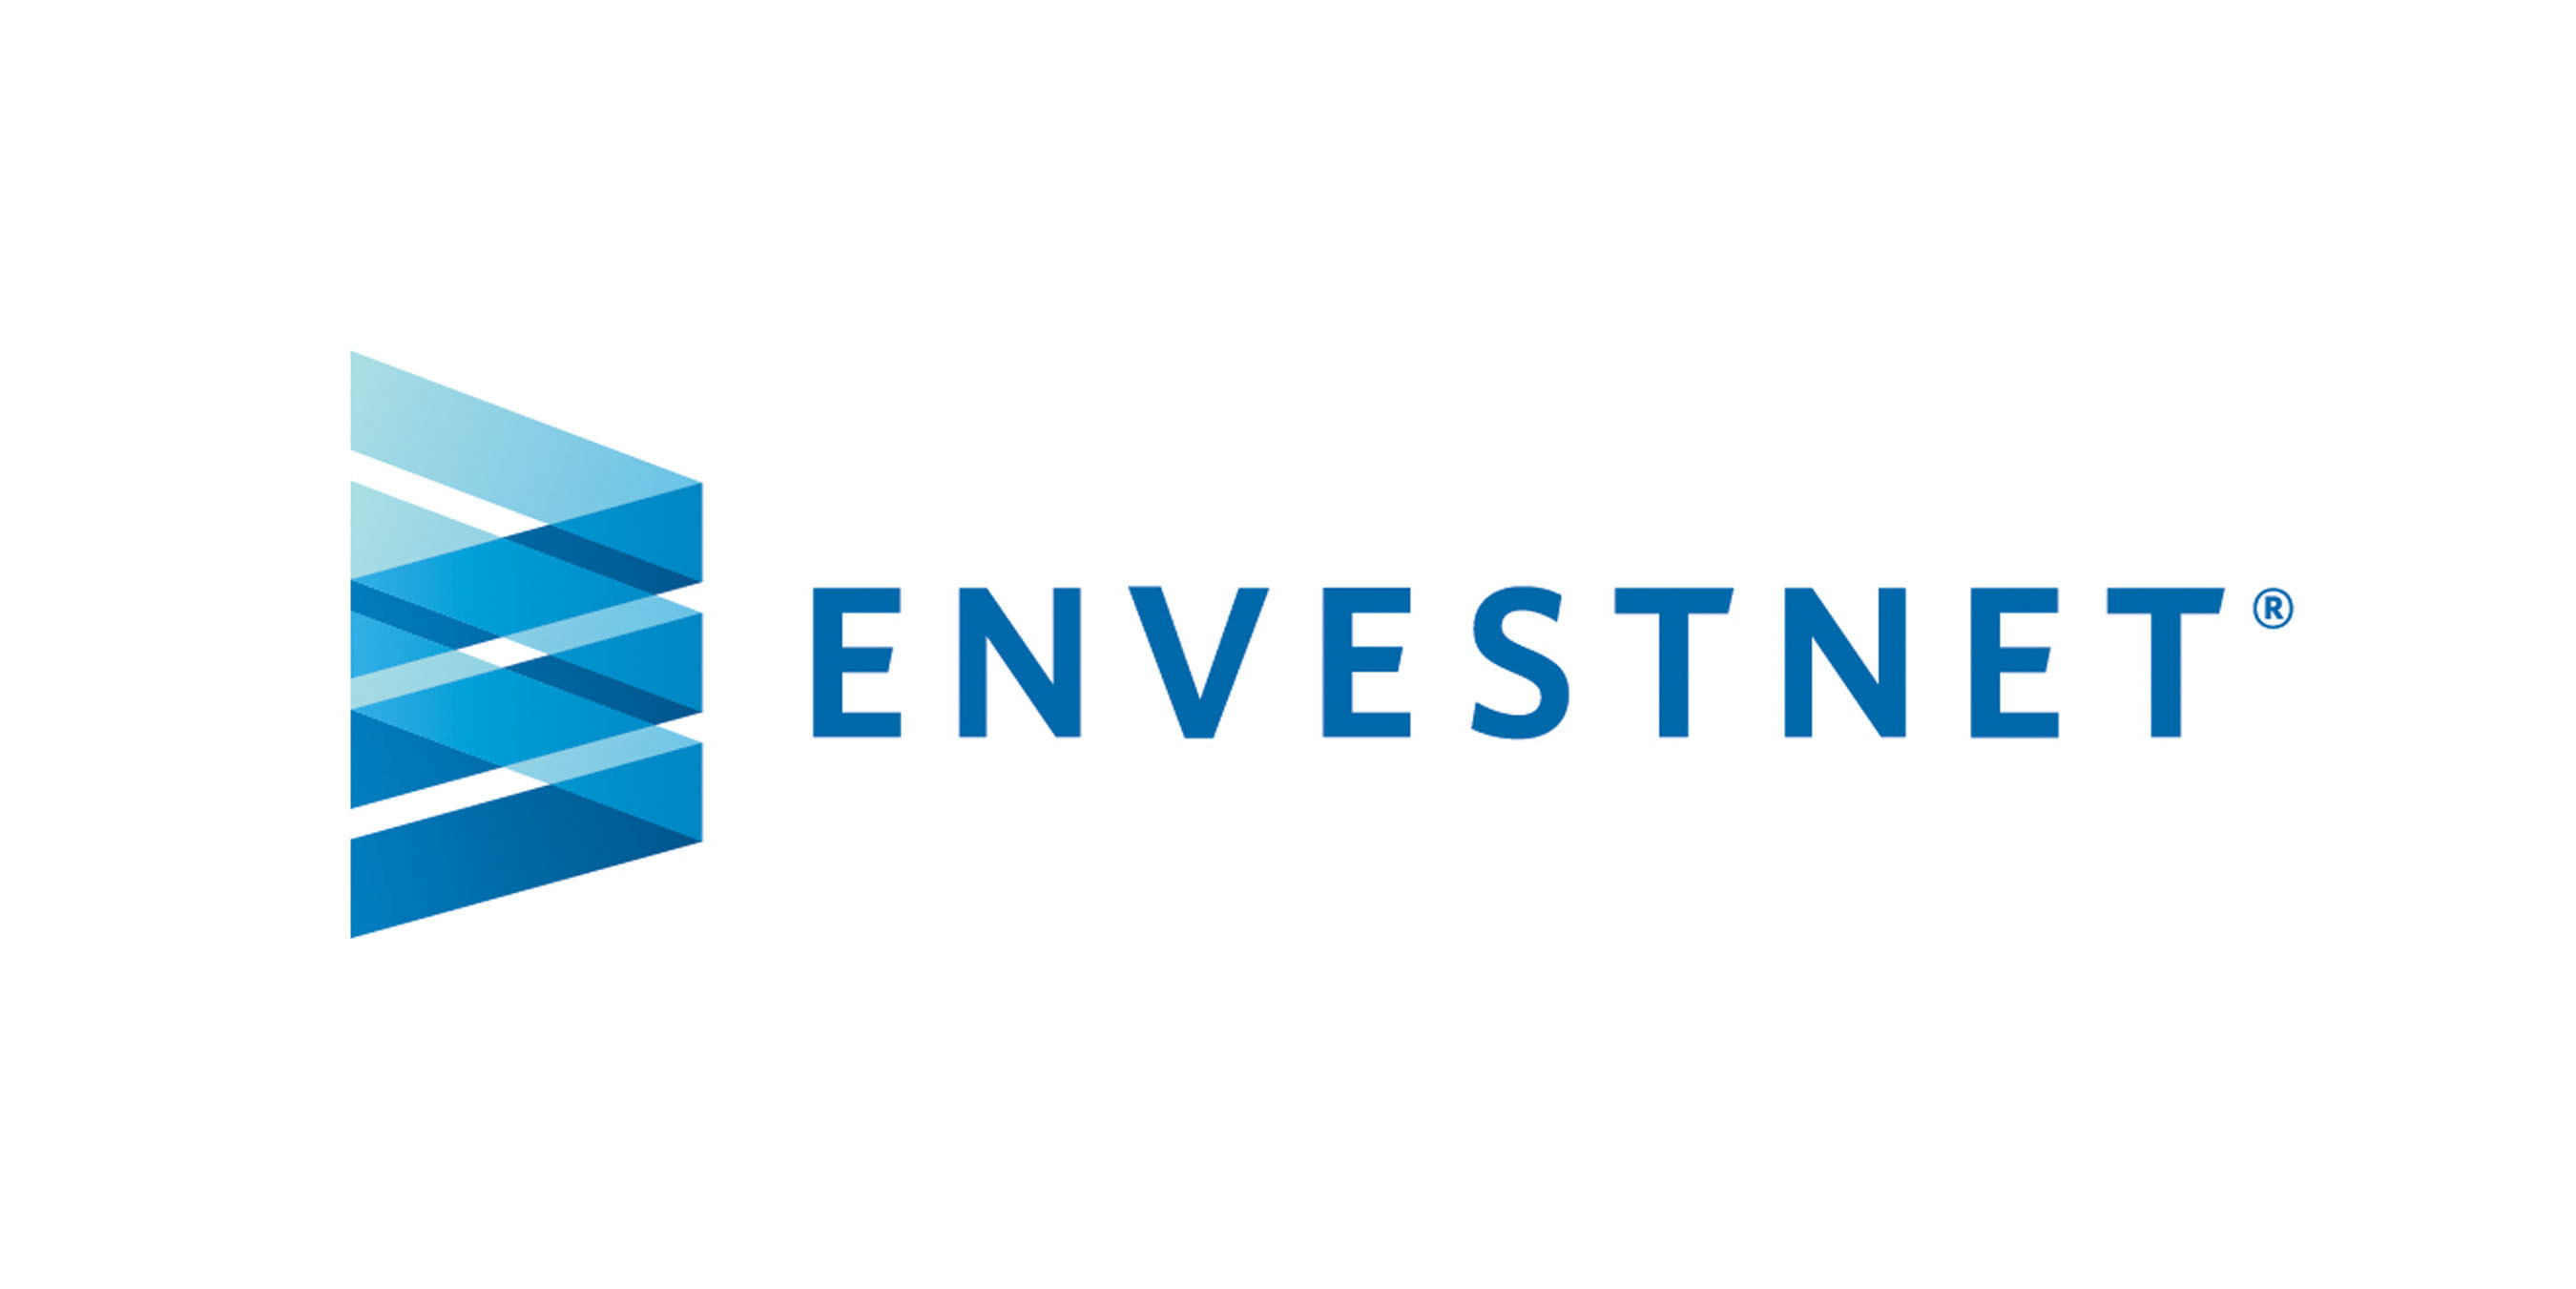 Envestnet, Inc. (NYSE: ENV) is a leading provider of unified wealth management technology and services to investment advisors. Our open-architecture platforms unify and fortify the wealth management process, delivering unparalleled flexibility, accuracy, performance and value. Envestnet solutions enable the transformation of wealth management into a transparent, independent, objective and fully-aligned standard of care, and empower advisors to deliver better outcomes. For more information on Envestnet, please visit www.envestnet.com.